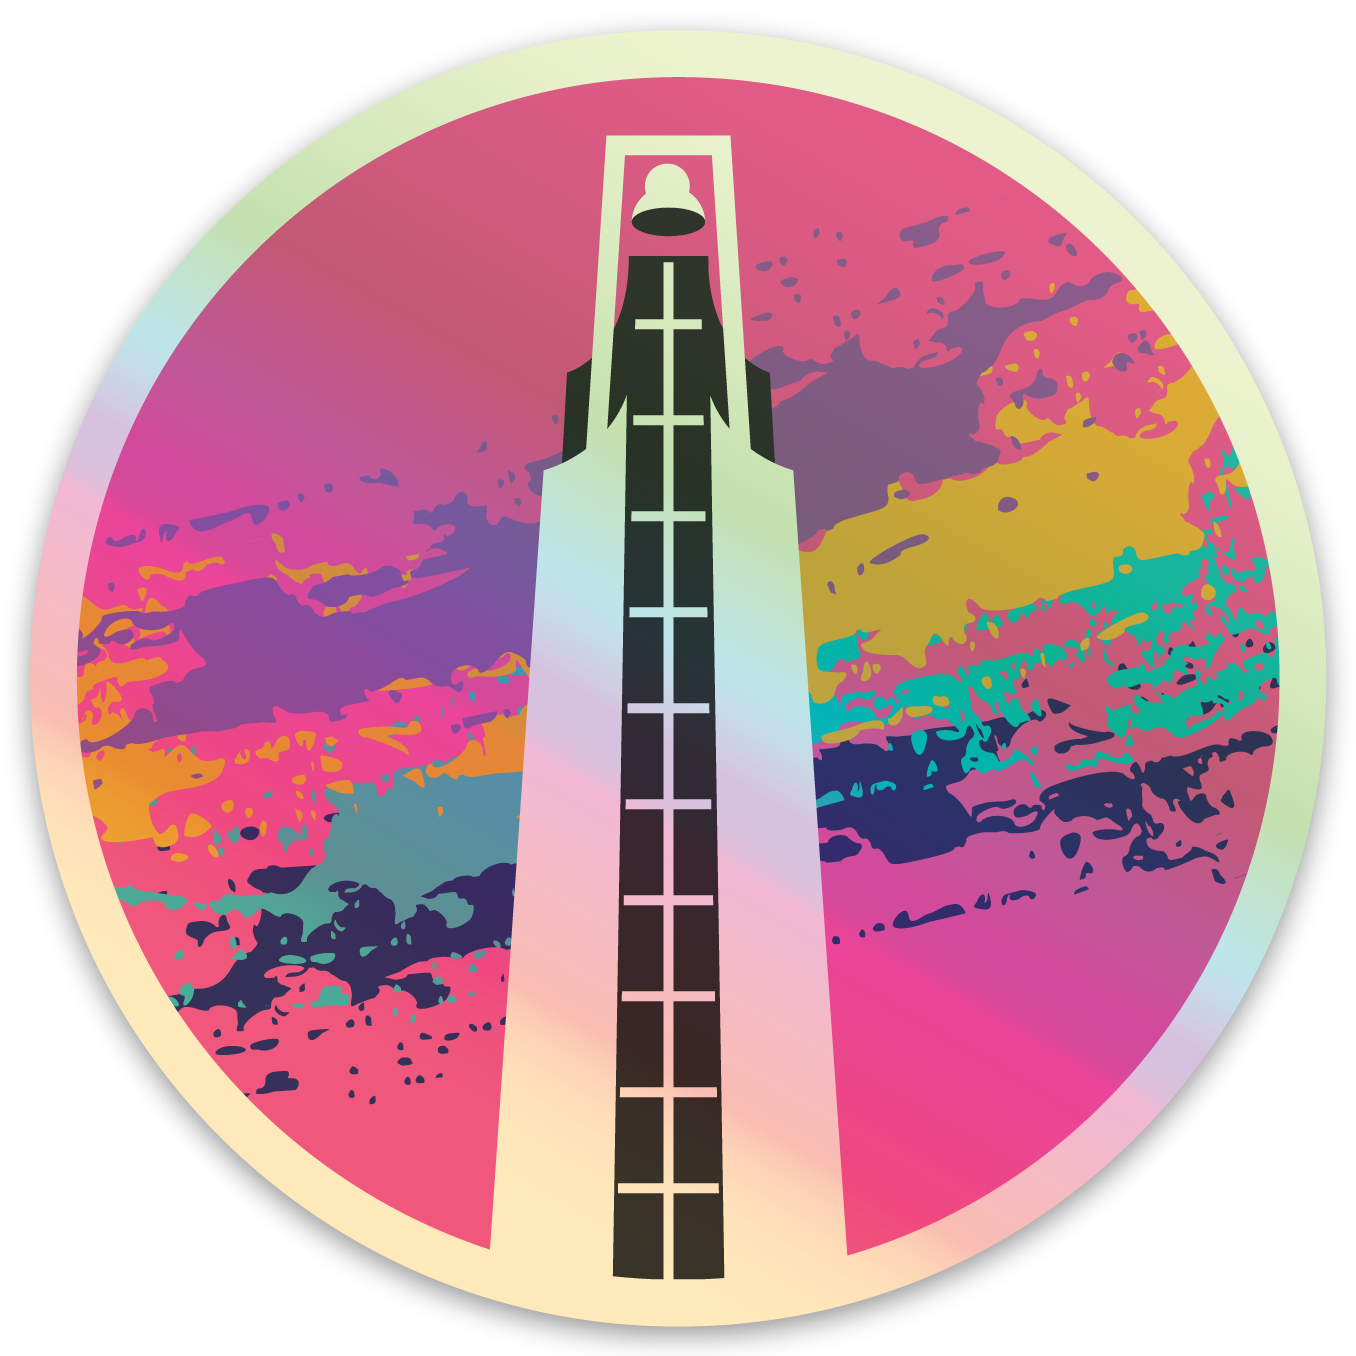 Holographic circle-shaped sticker. Pink background with a black and white drawing of a bell tower. Turqouise, navy, mustard, and purple splotches behind the bell tower. 